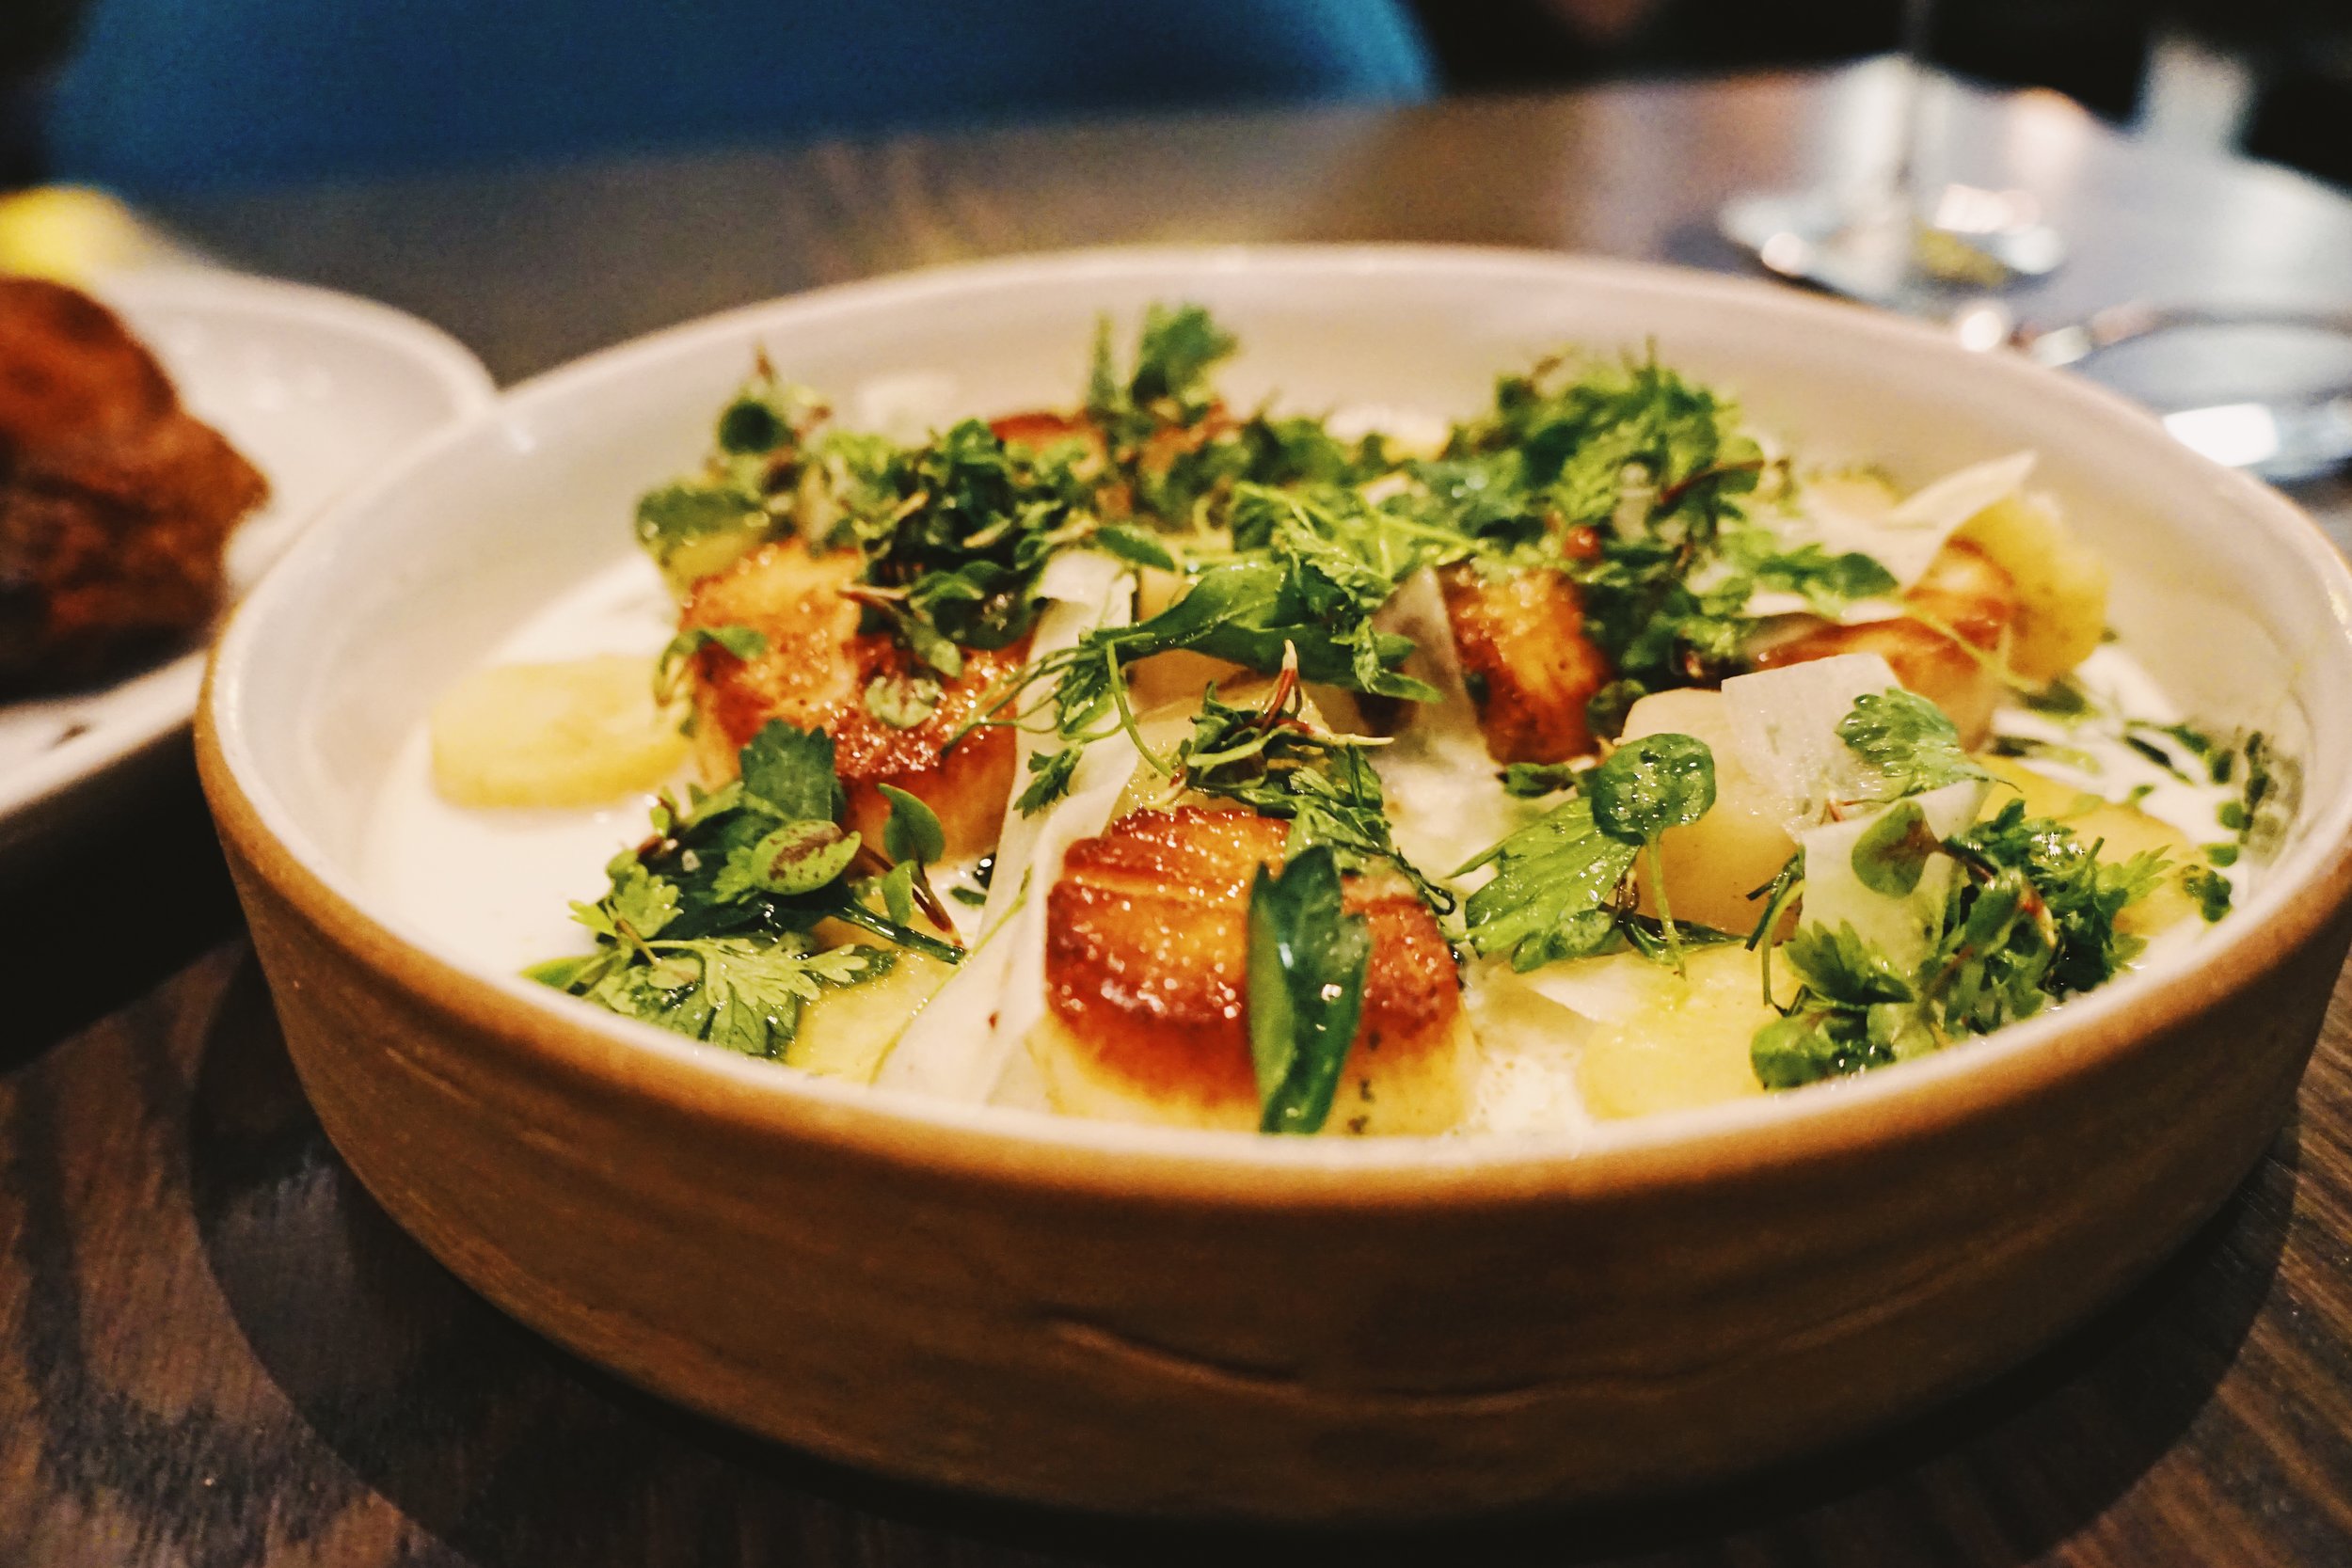  Seared Scallops with White Yam, Salsify, Buttermilk, and Sorrel. 